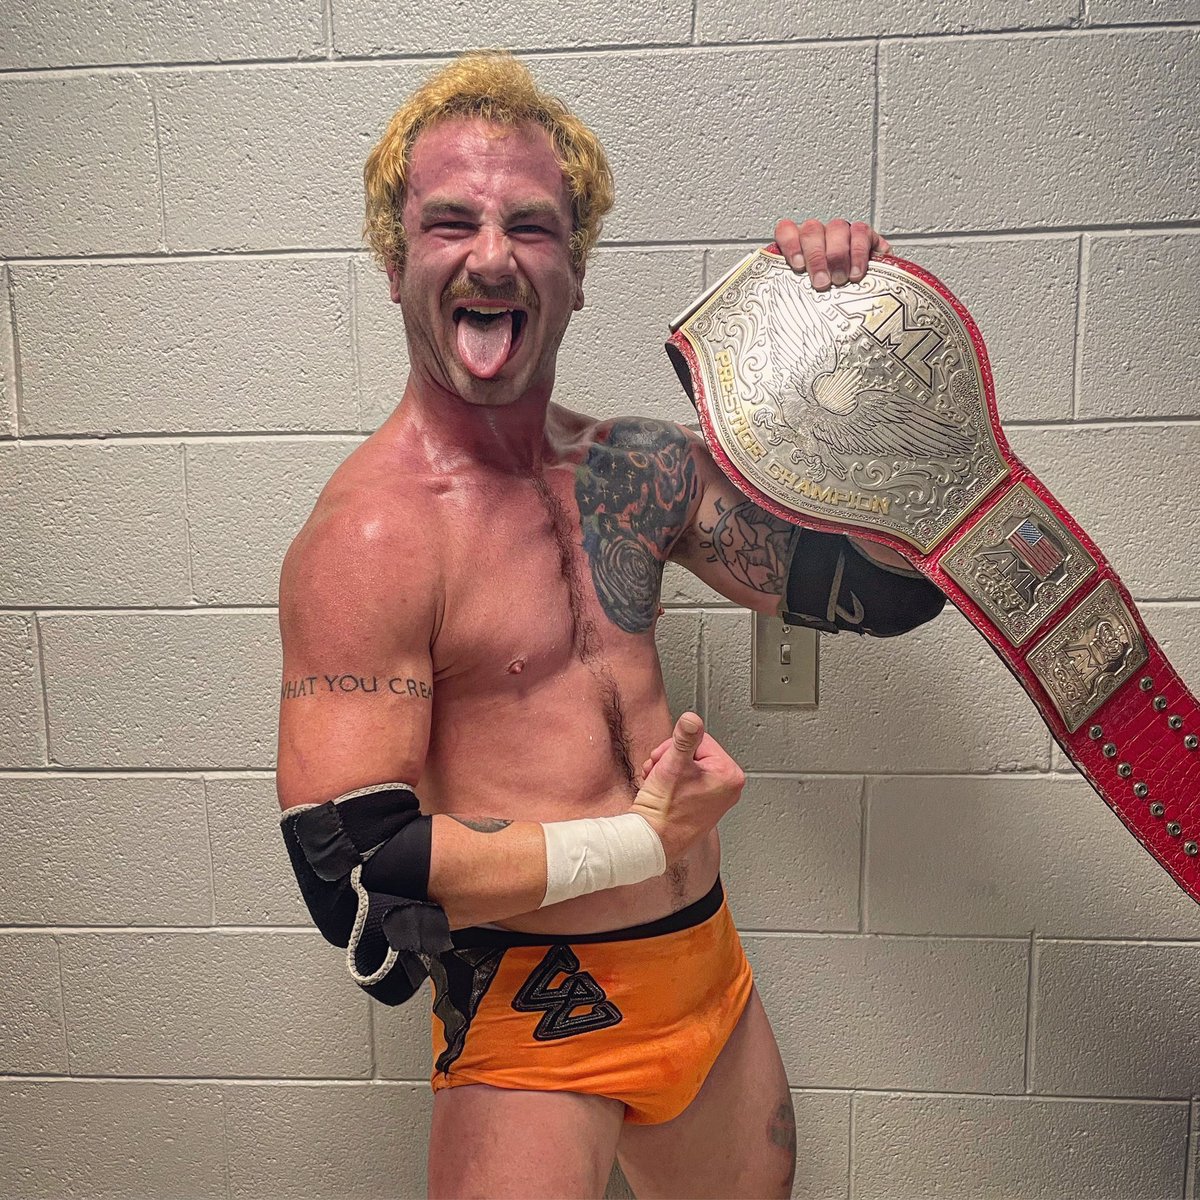 Here is your NEW #AMLWrestling Prestige Champion, Colby Corino!